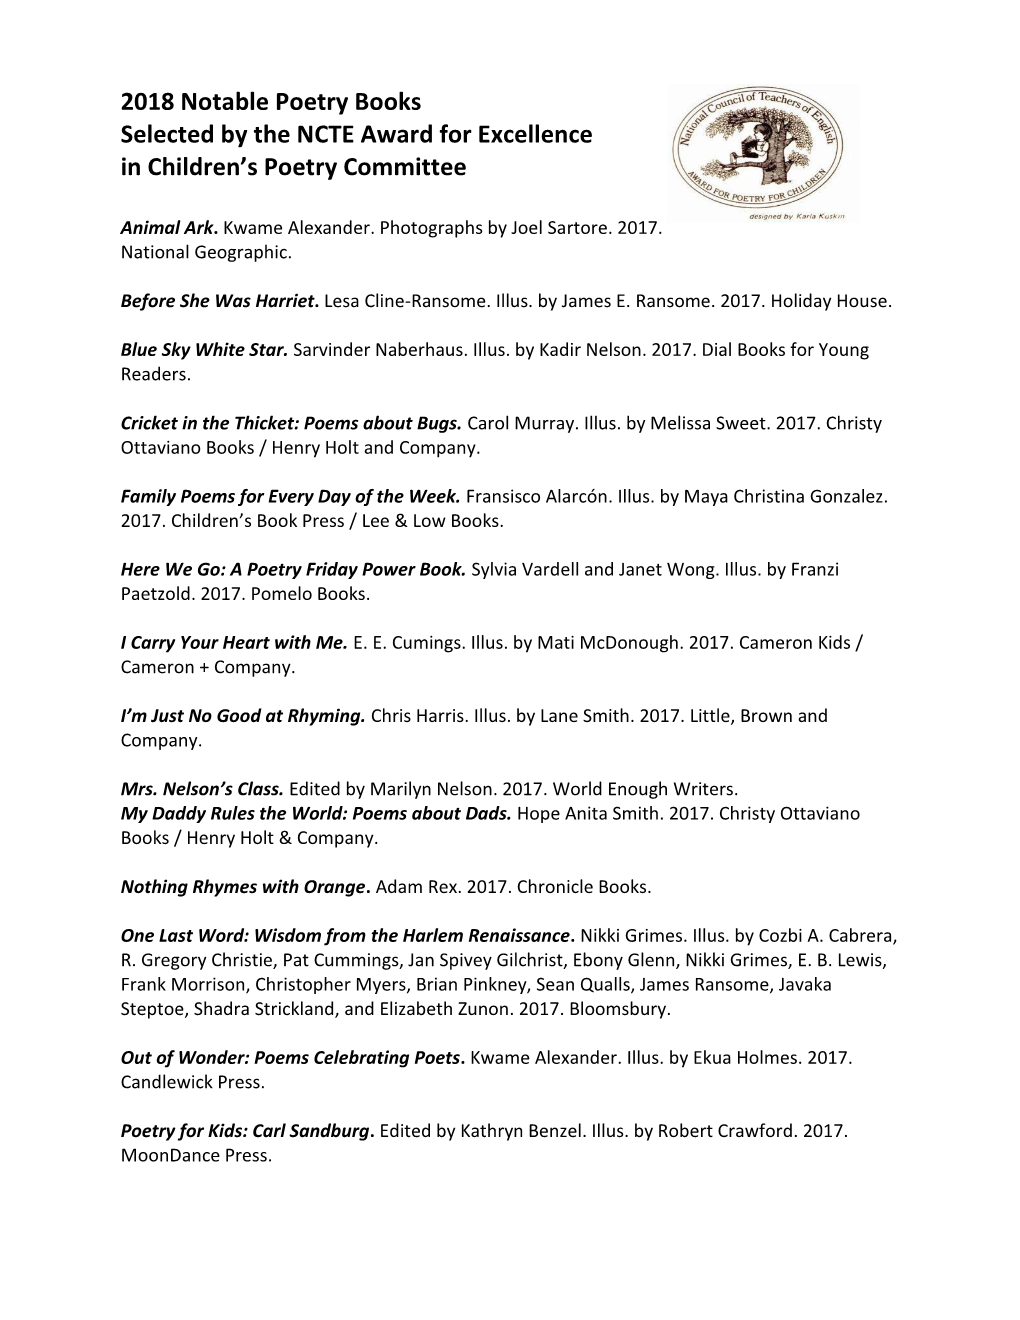 2018 Notable Poetry Books Selected by the NCTE Award for Excellence in Children’S Poetry Committee